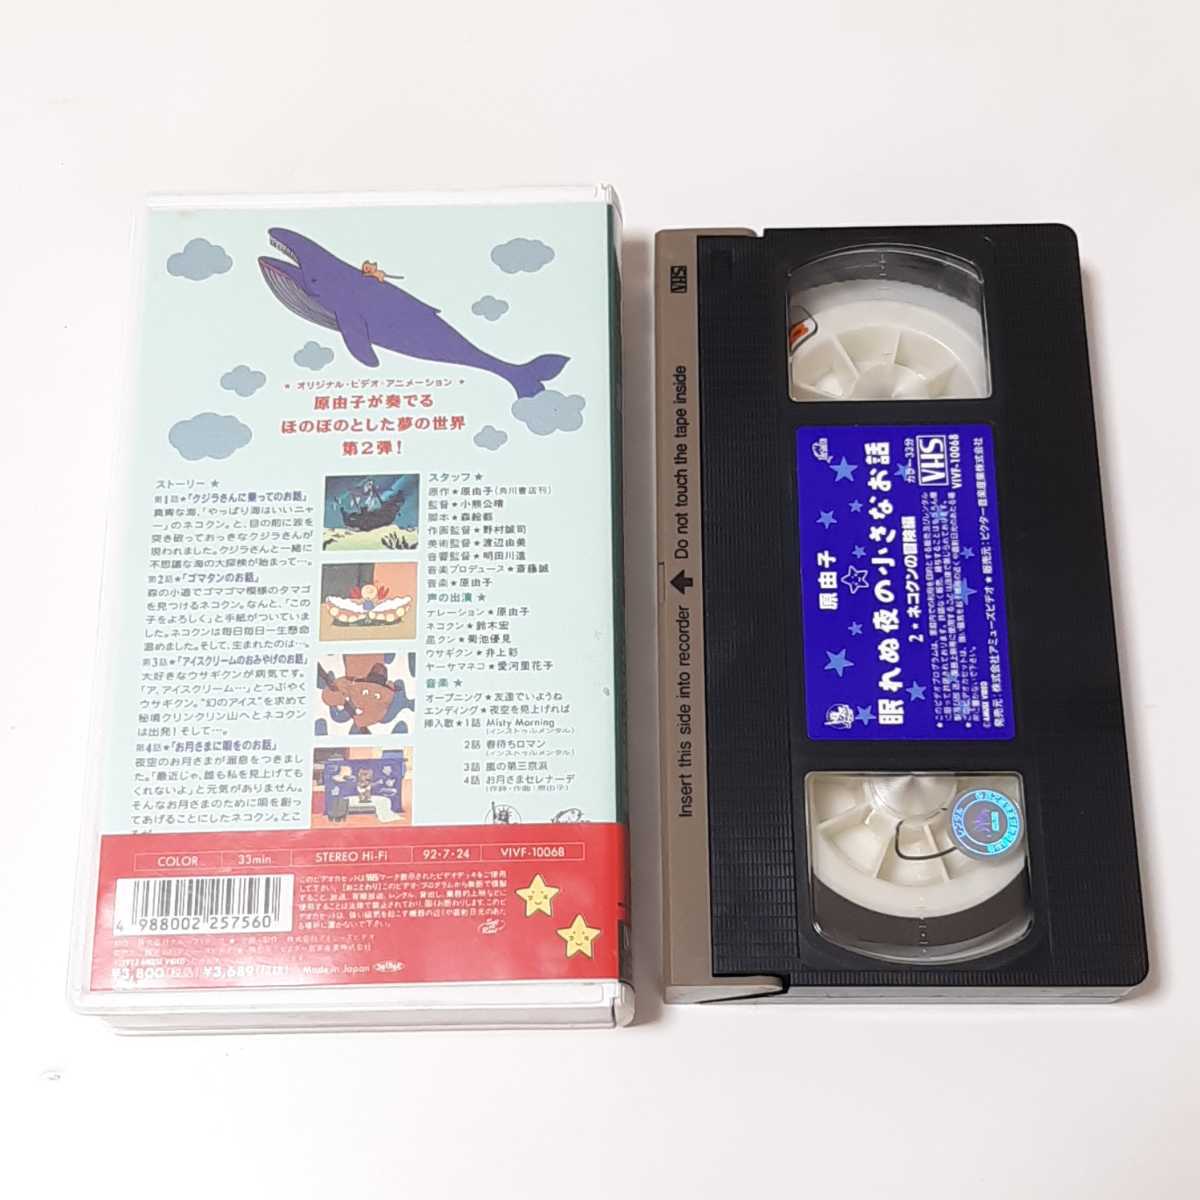 ... night. small . story 2 cat kn. adventure compilation VHS... Southern All Stars video 1992 year 